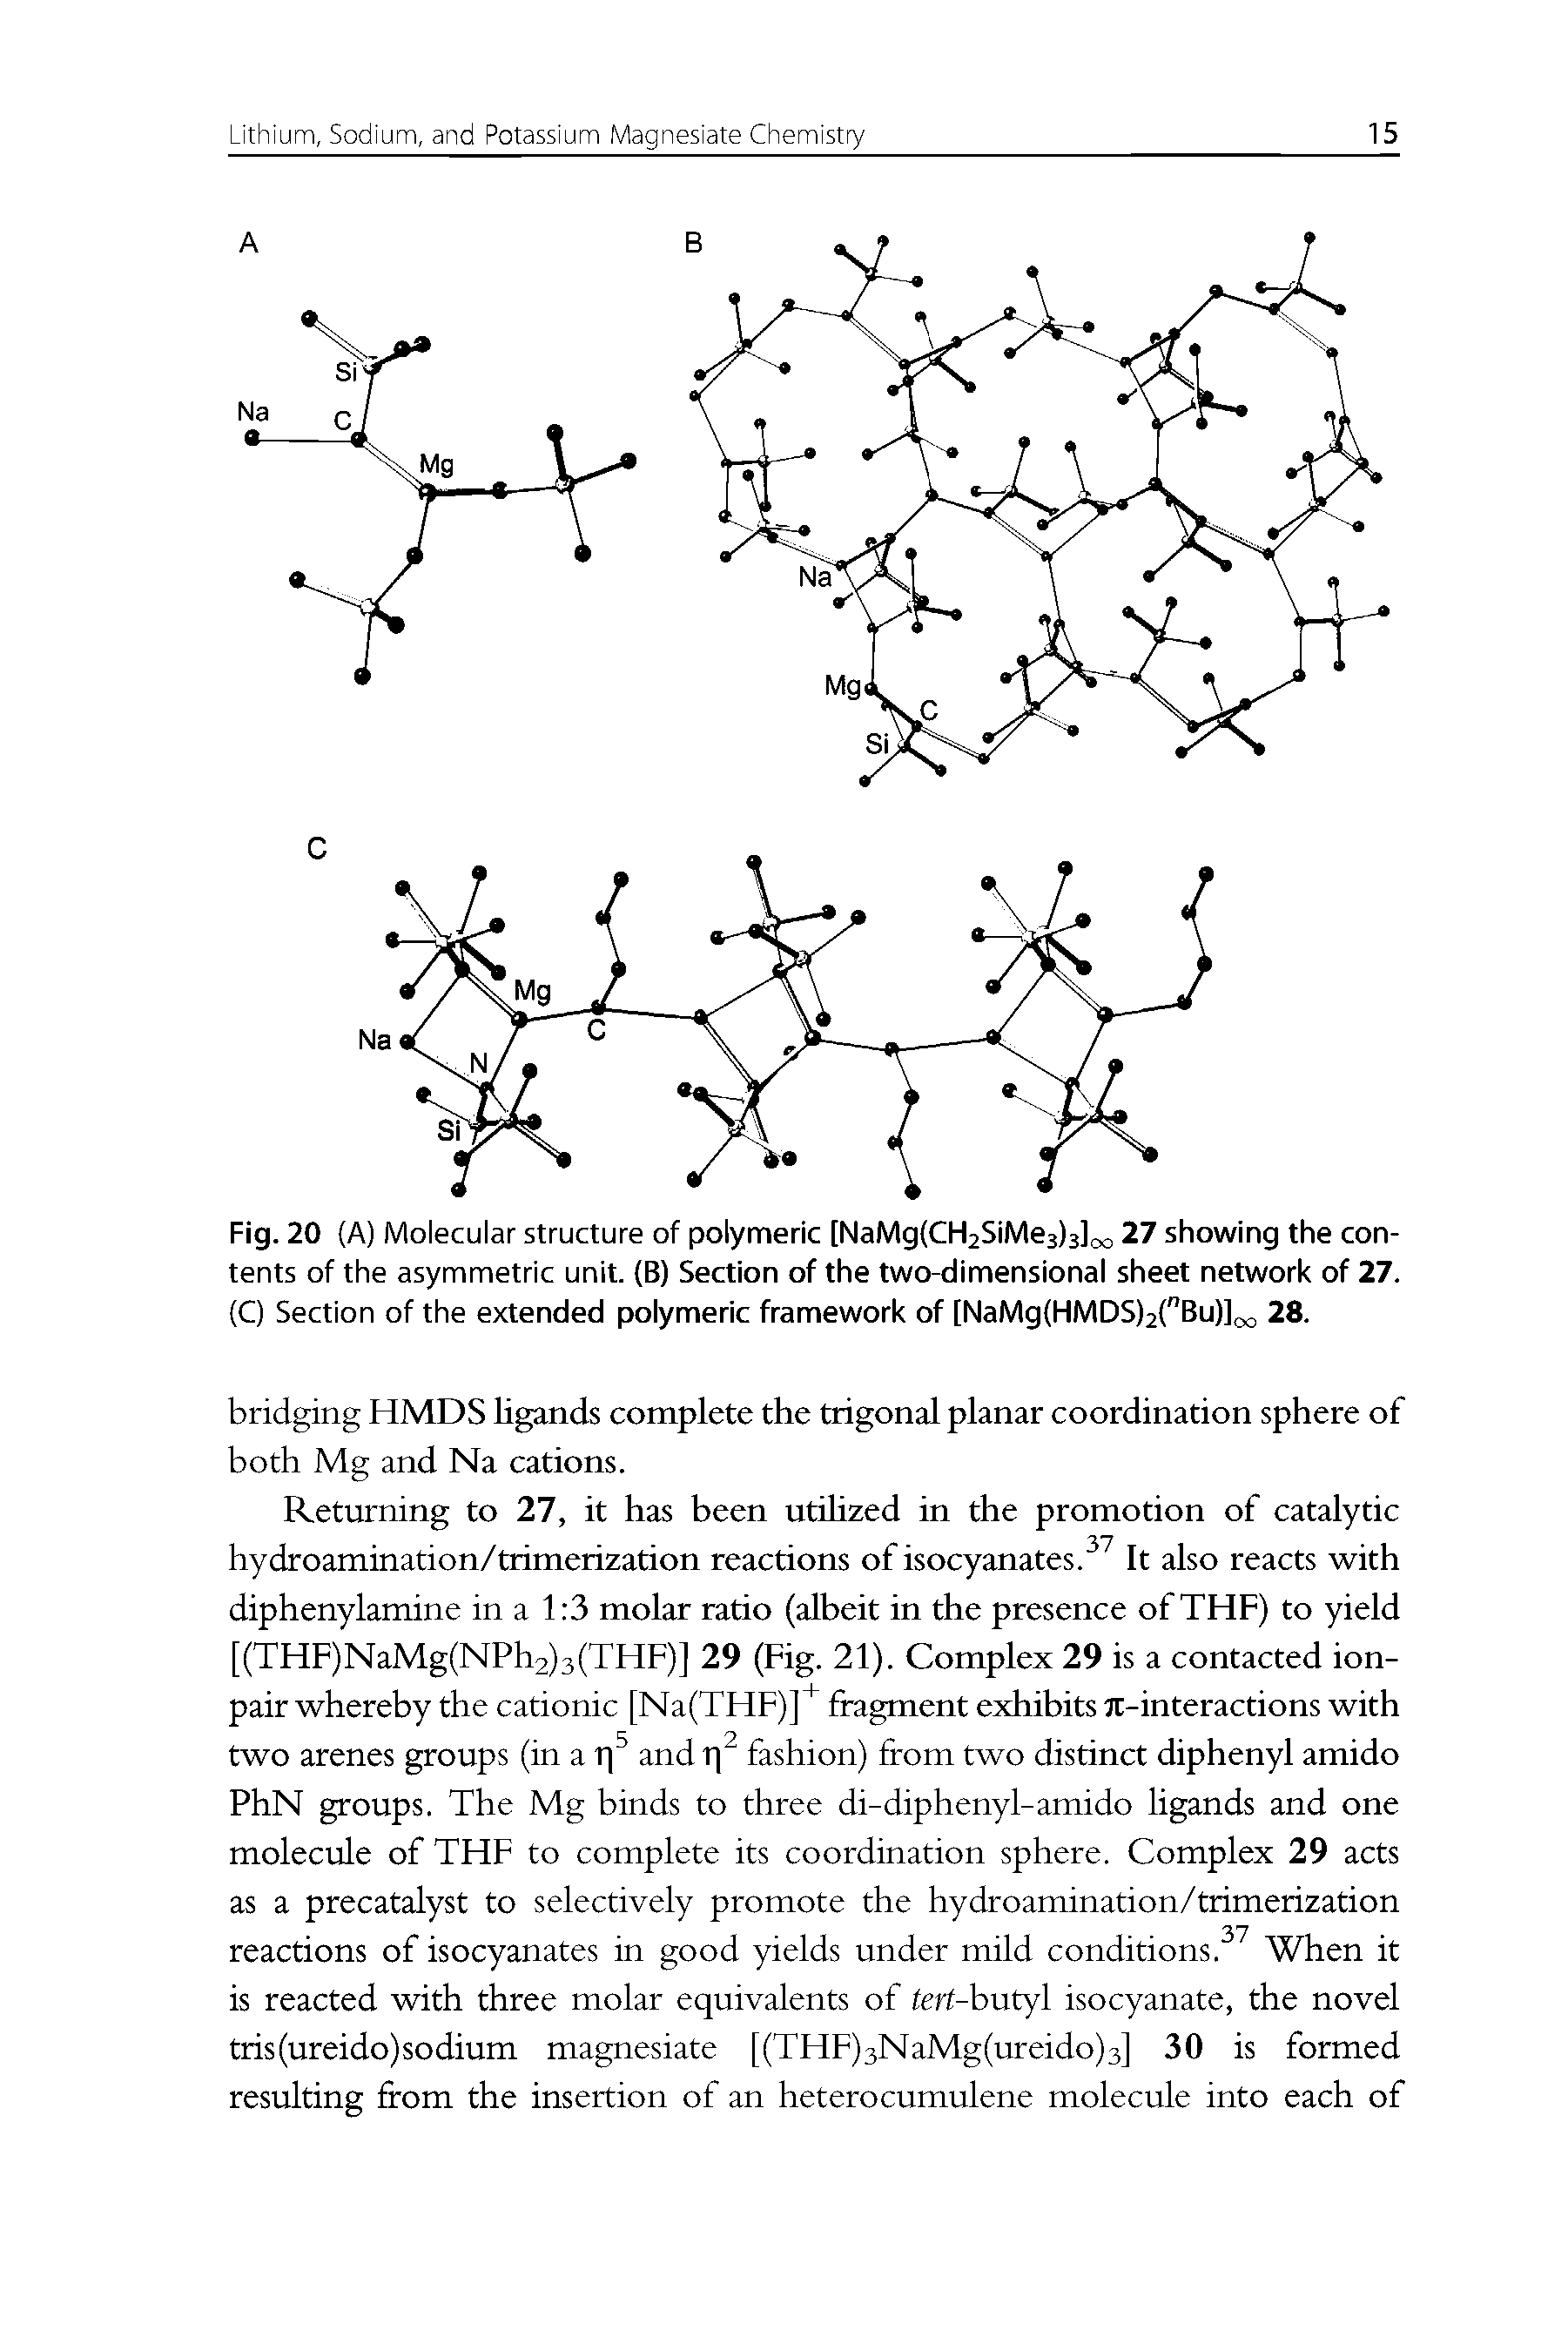 Fig. 20 (A) Molecular structure of polymeric [NaMg(CH2SiMe3)3loo 27 showing the contents of the asymmetric unit. (B) Section of the two-dimensional sheet network of 27. (C) Section of the extended polymeric framework of [NaMg(HMDS)2("Bu)]oo 28.